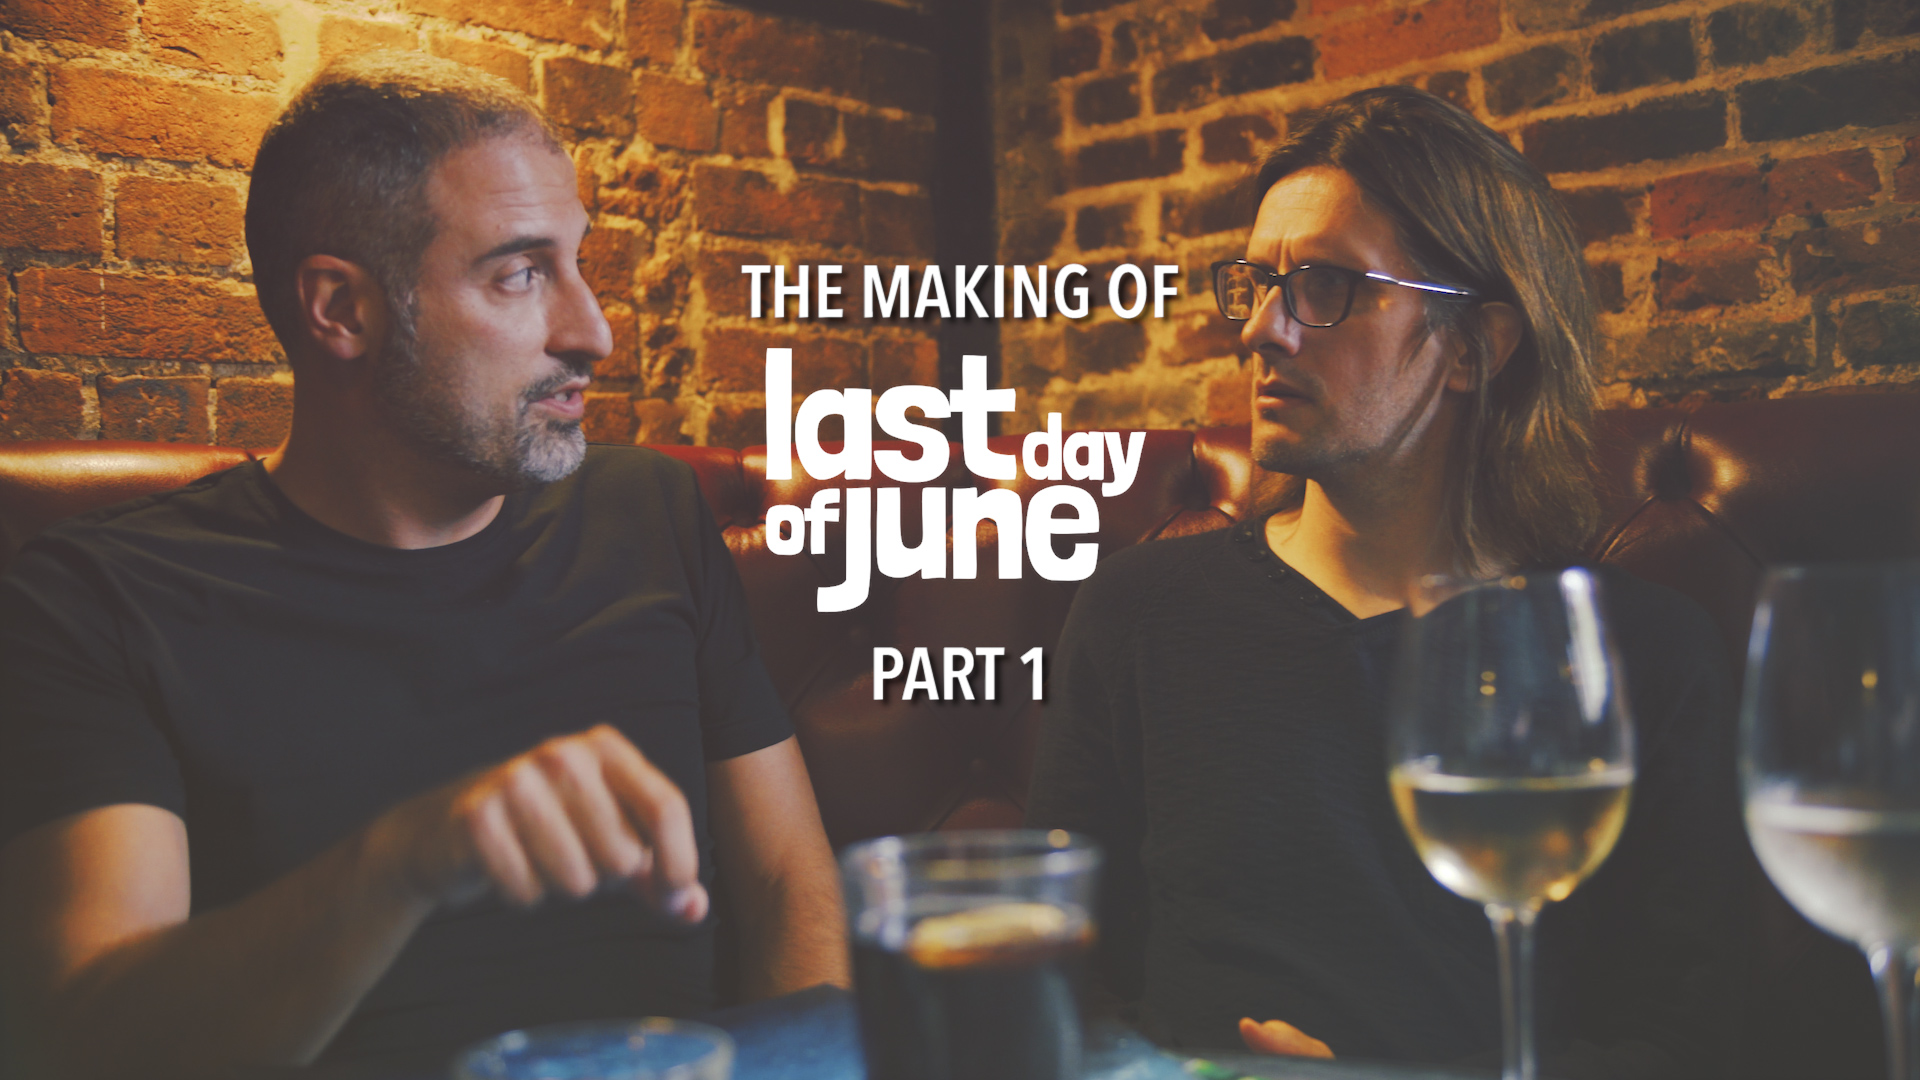 Last Day of June - The Making of